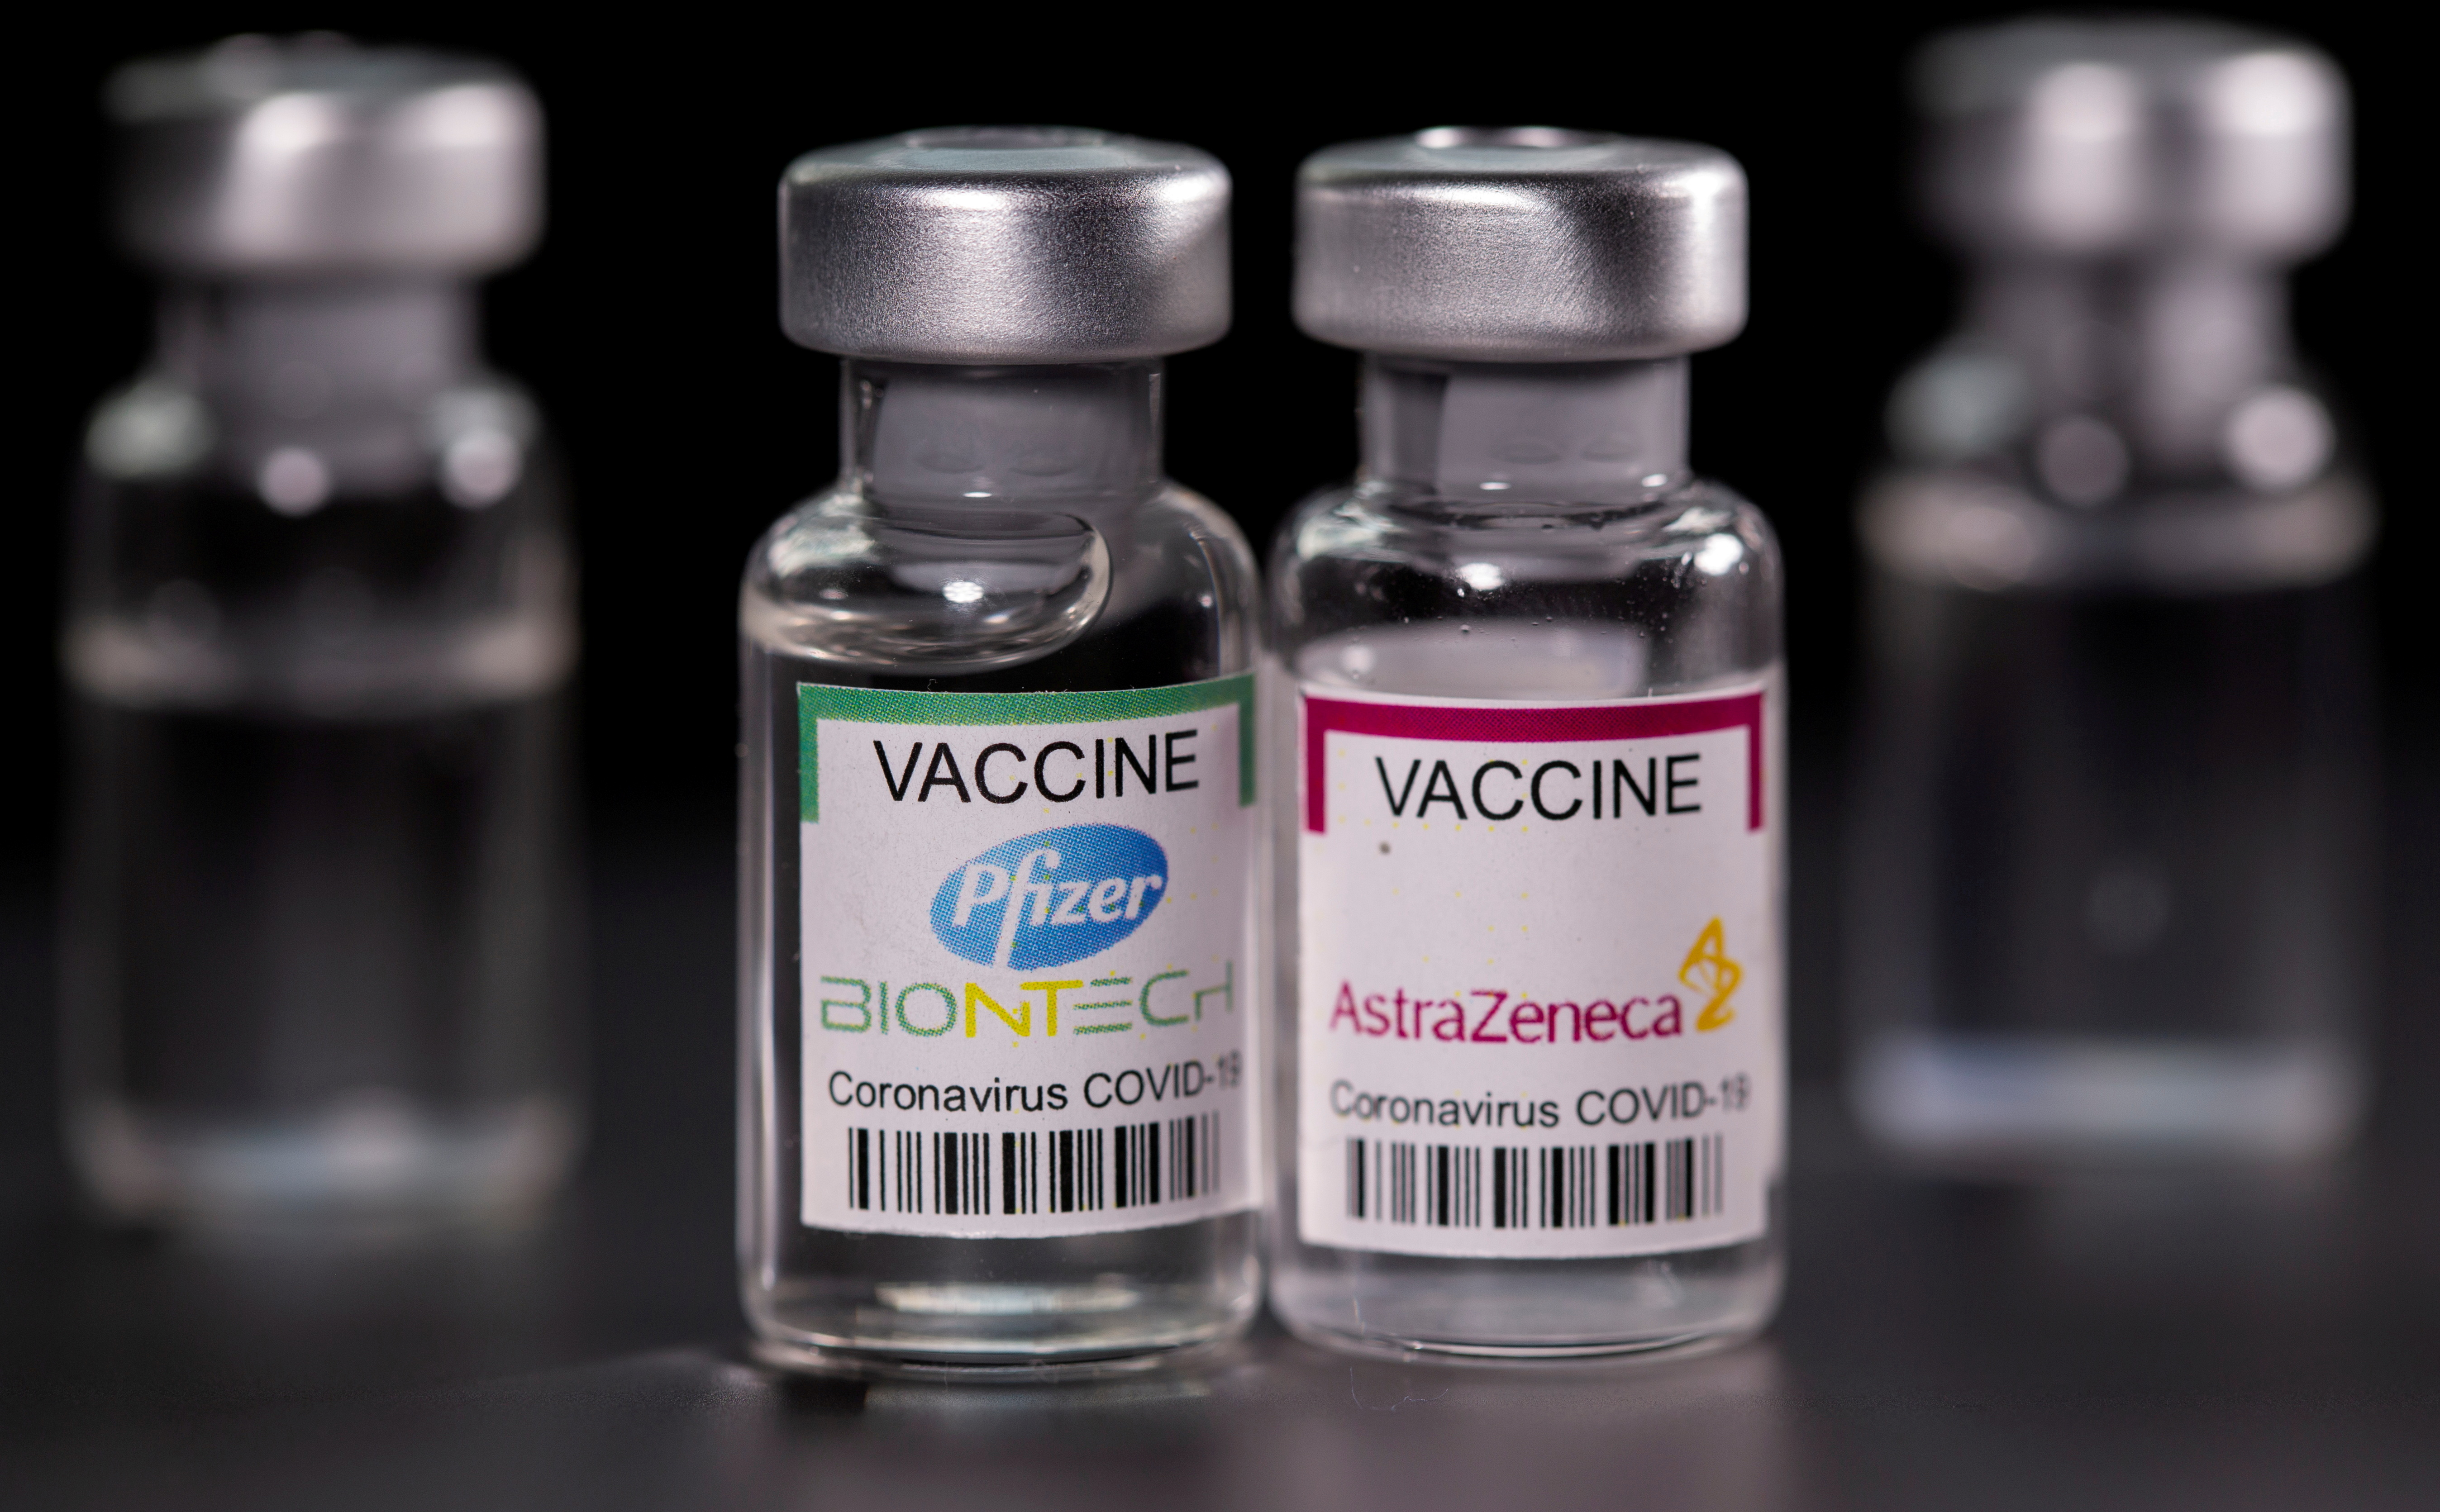 Picture illustration of vials with Pfizer-BioNTech and AstraZeneca coronavirus disease (COVID-19) vaccine labels